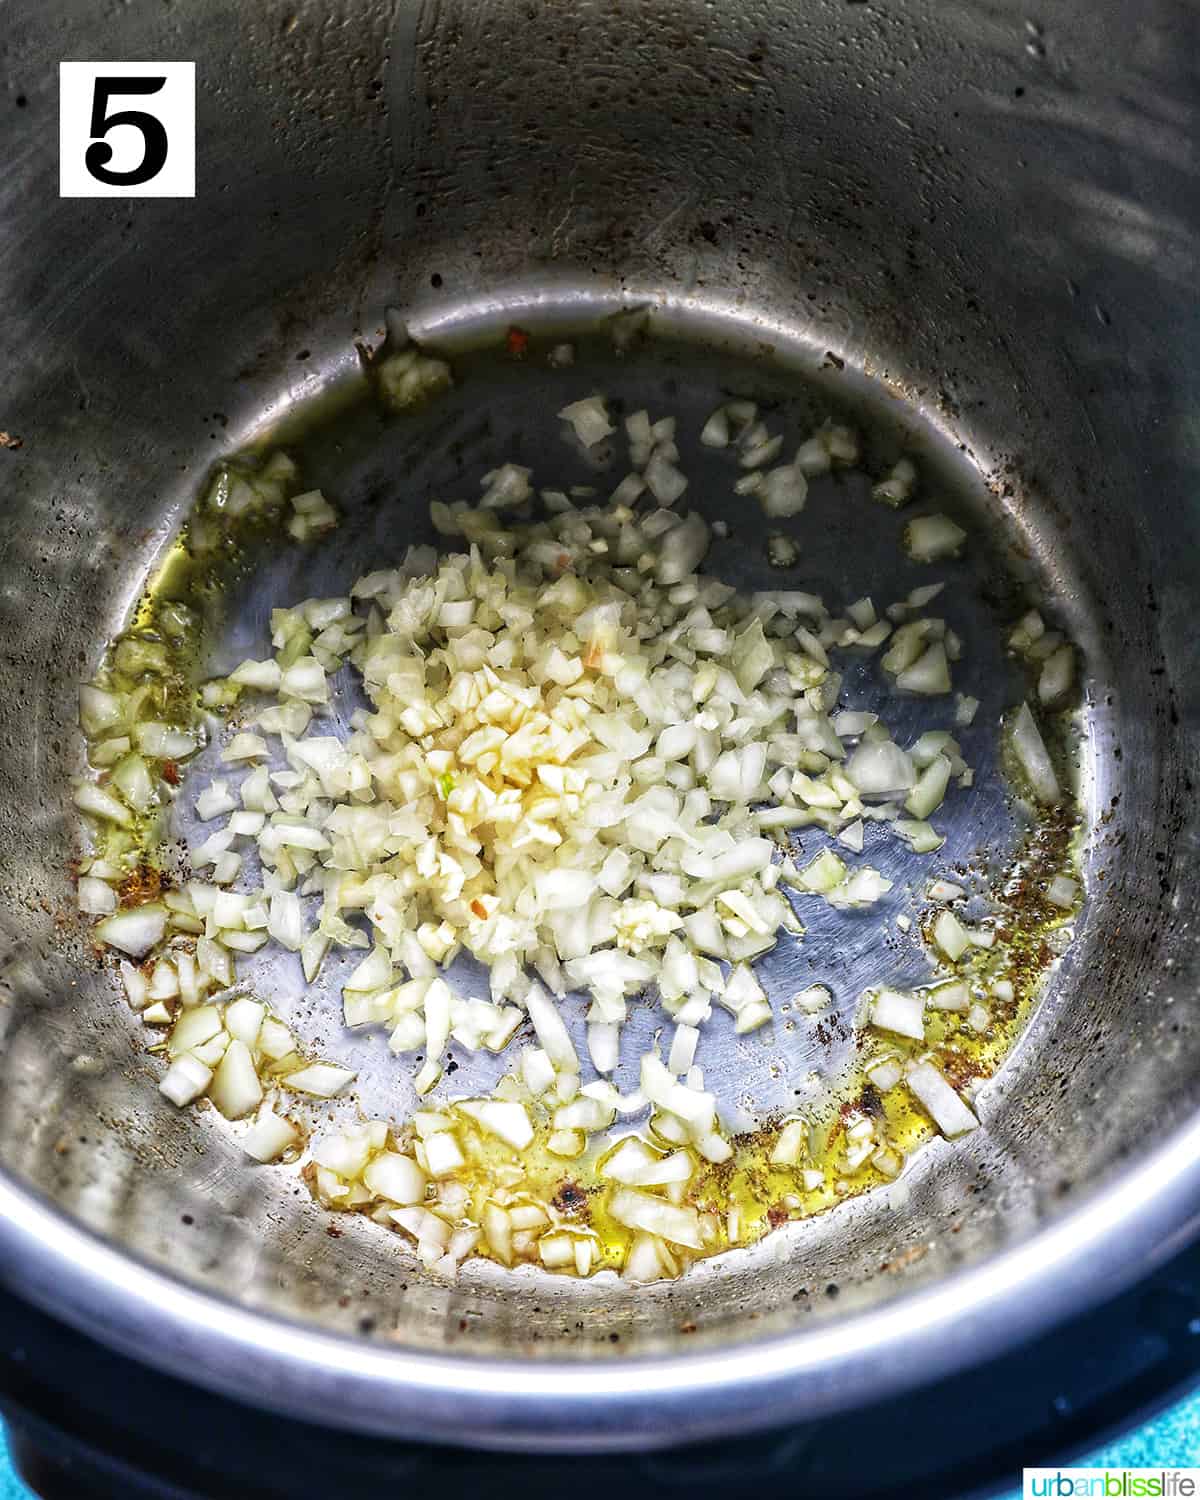 sauteing garlic and onions in olive oil in the Instant Pot